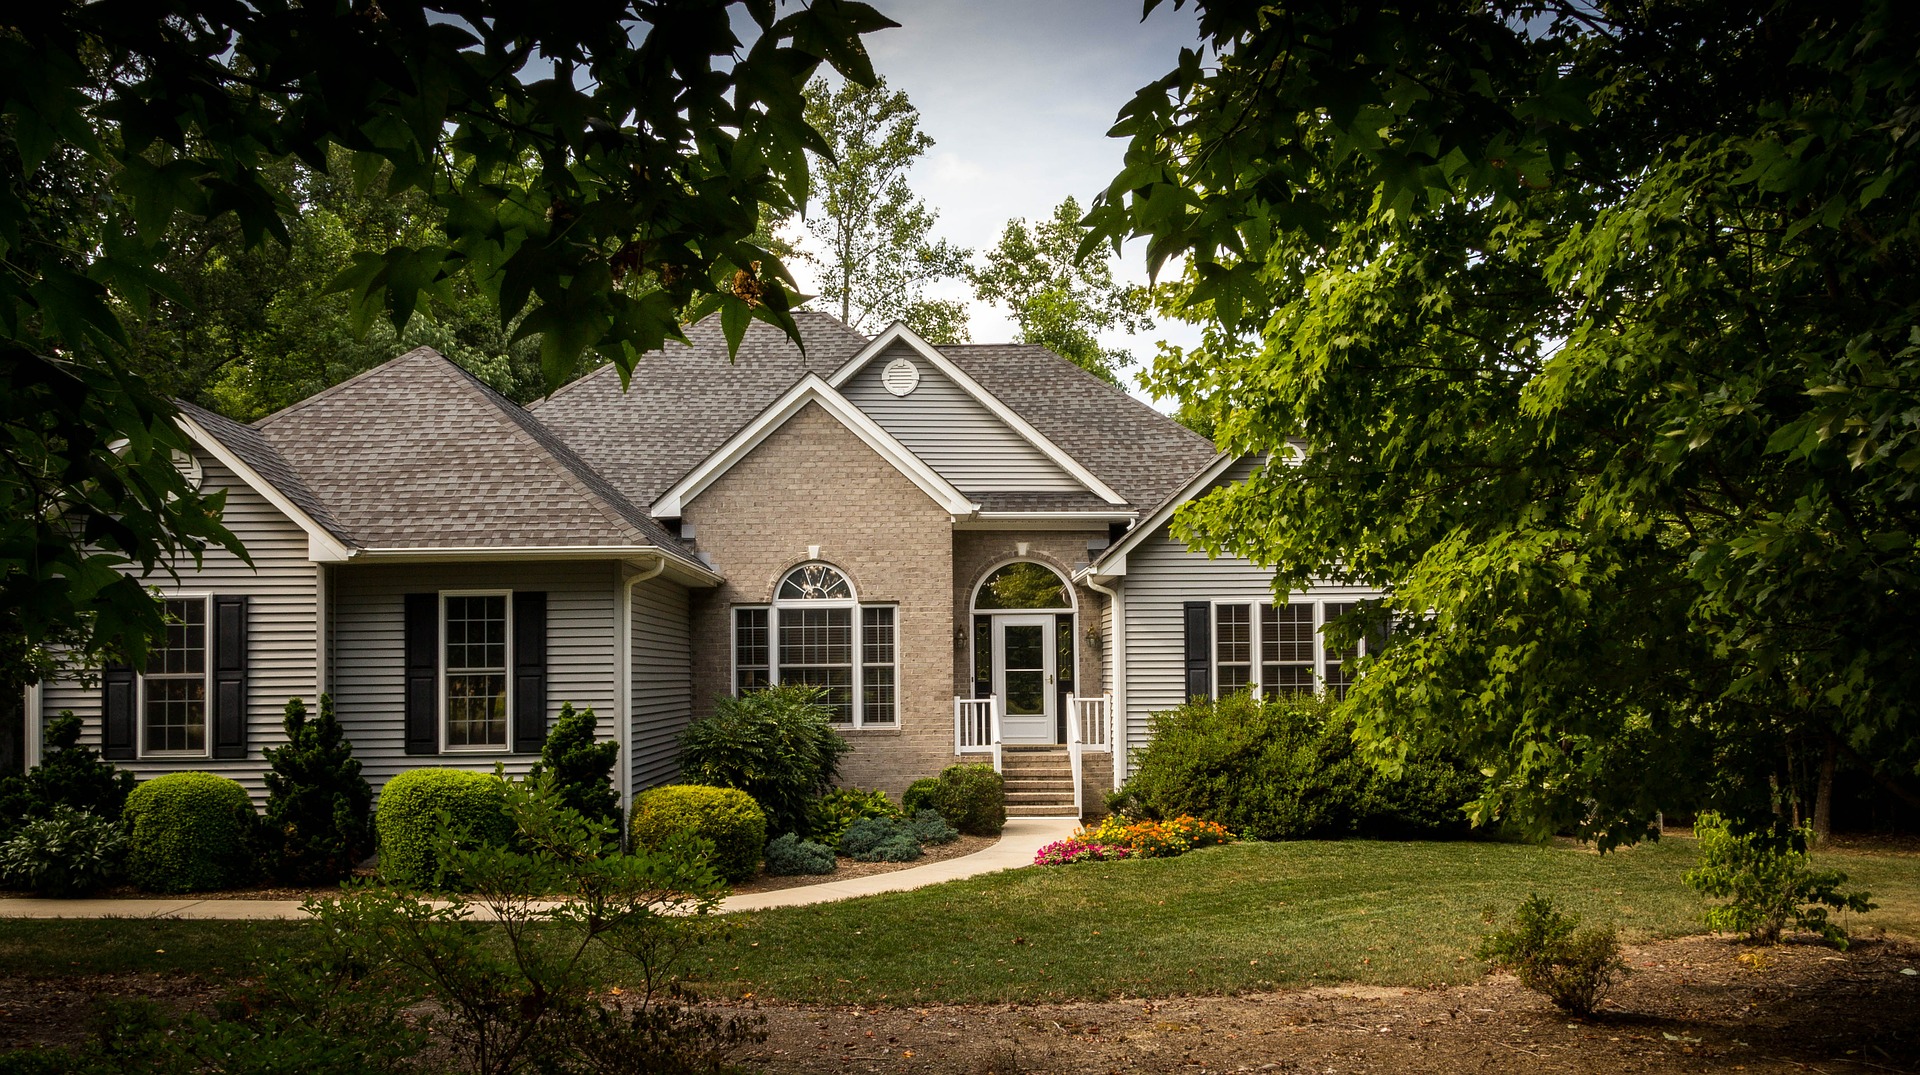 Homeowners Insurance: Why Now is A Good Time to Assess Coverage